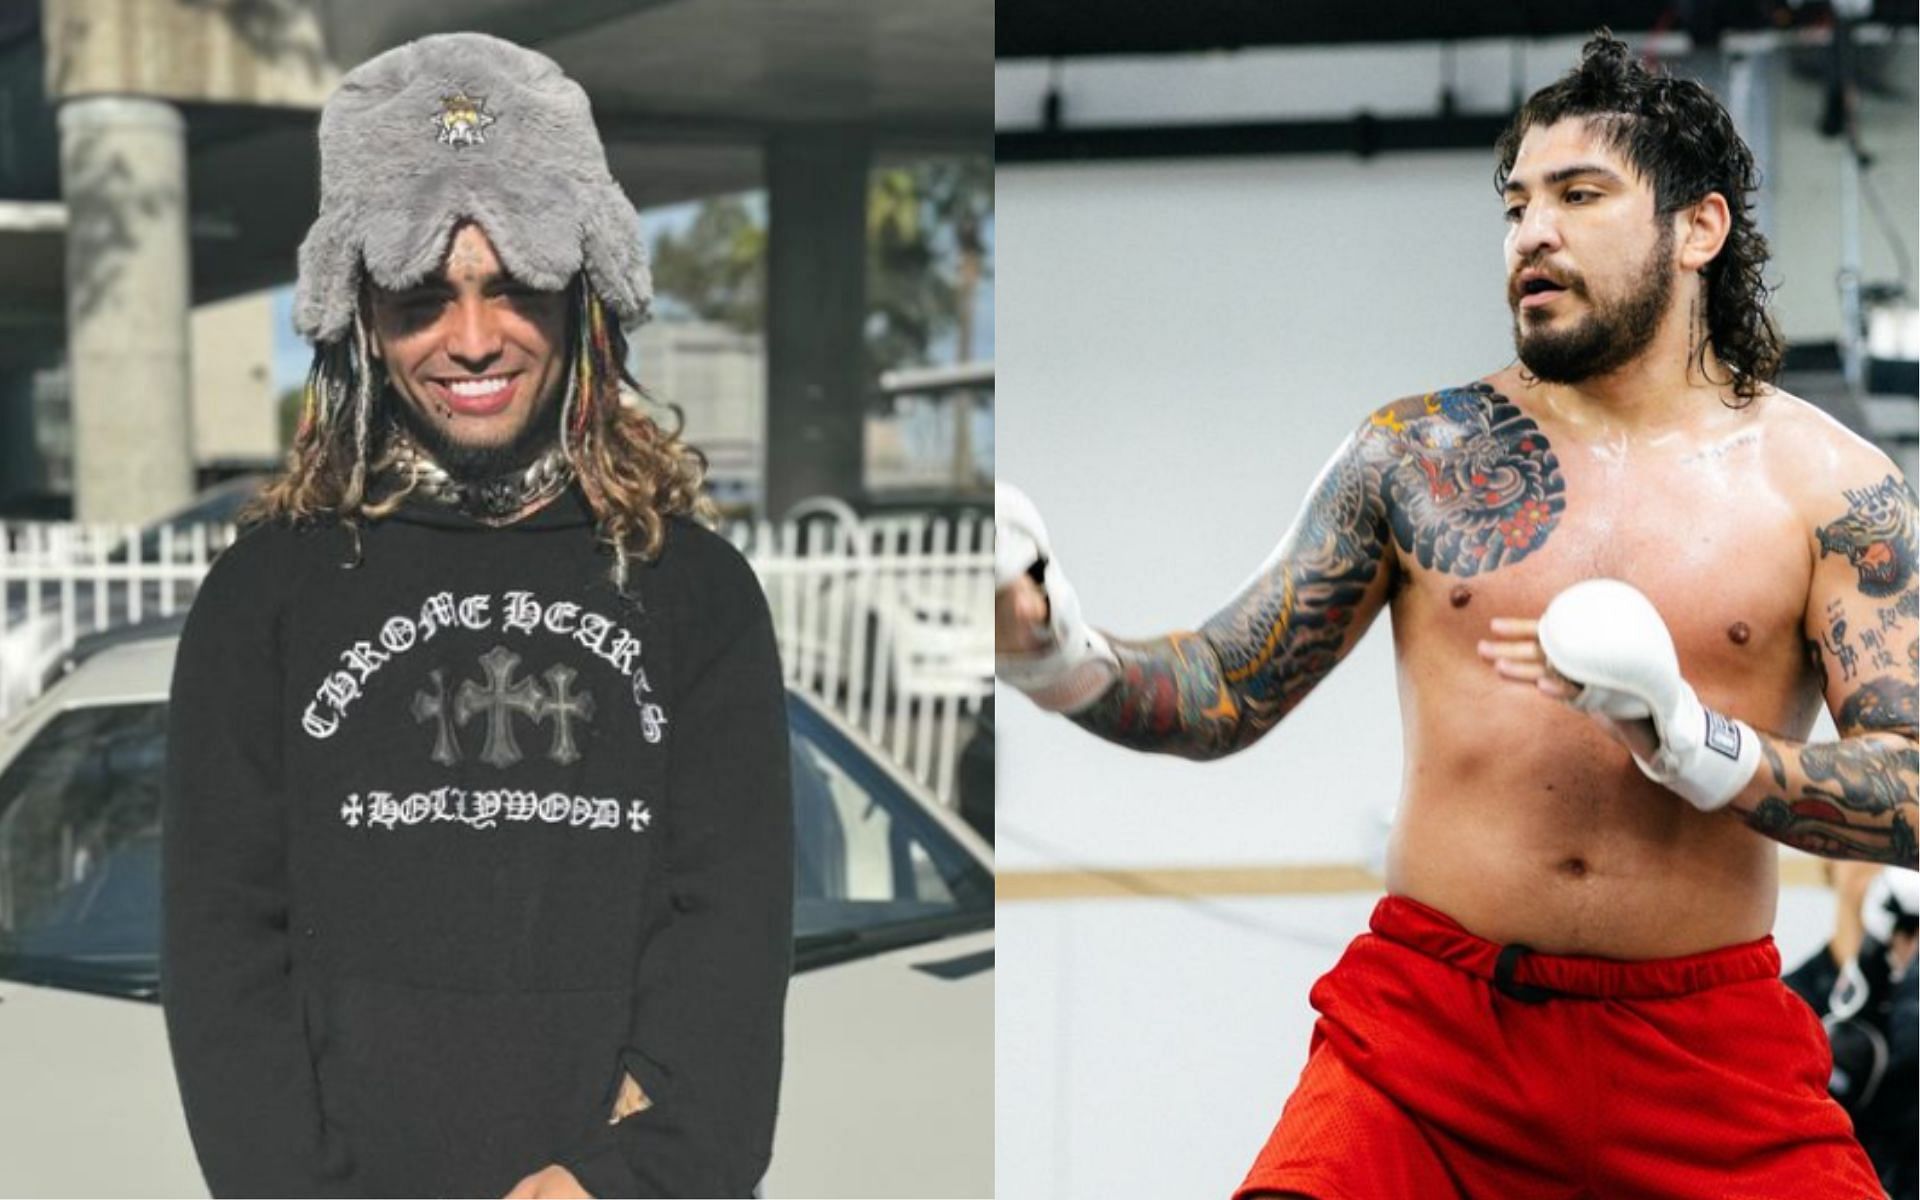 Lil Pump (left) calls out Dillon Danis (right) [Images courtesy: @lilpump and @dillondanis on Instagram]